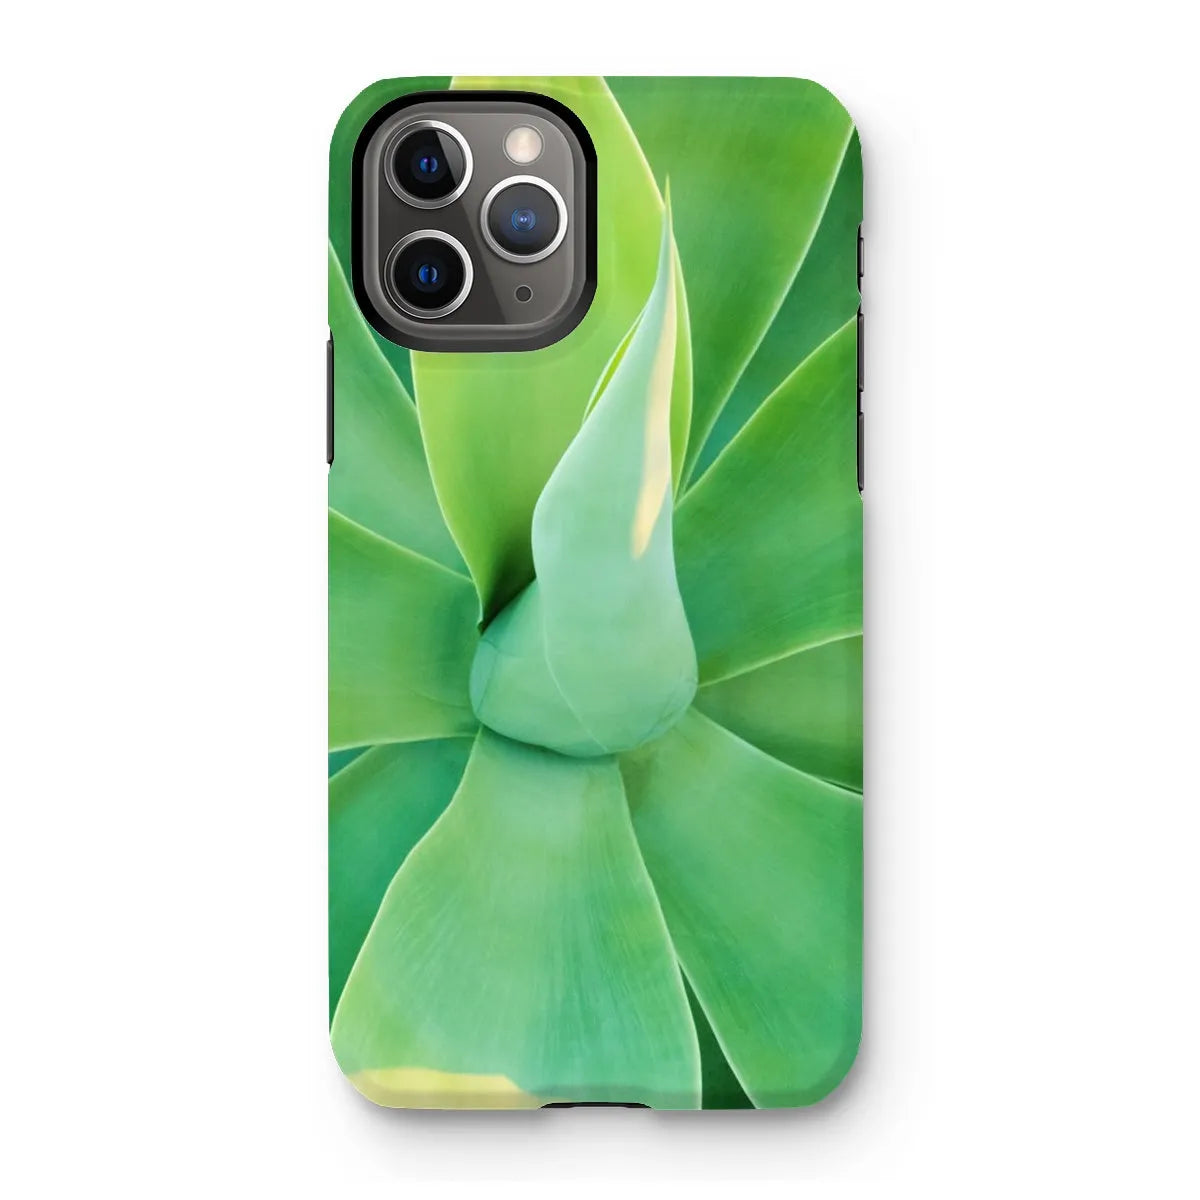 In Bloom Too Tough Phone Case - Iphone 11 Pro / Matte - Mobile Phone Cases - Aesthetic Art